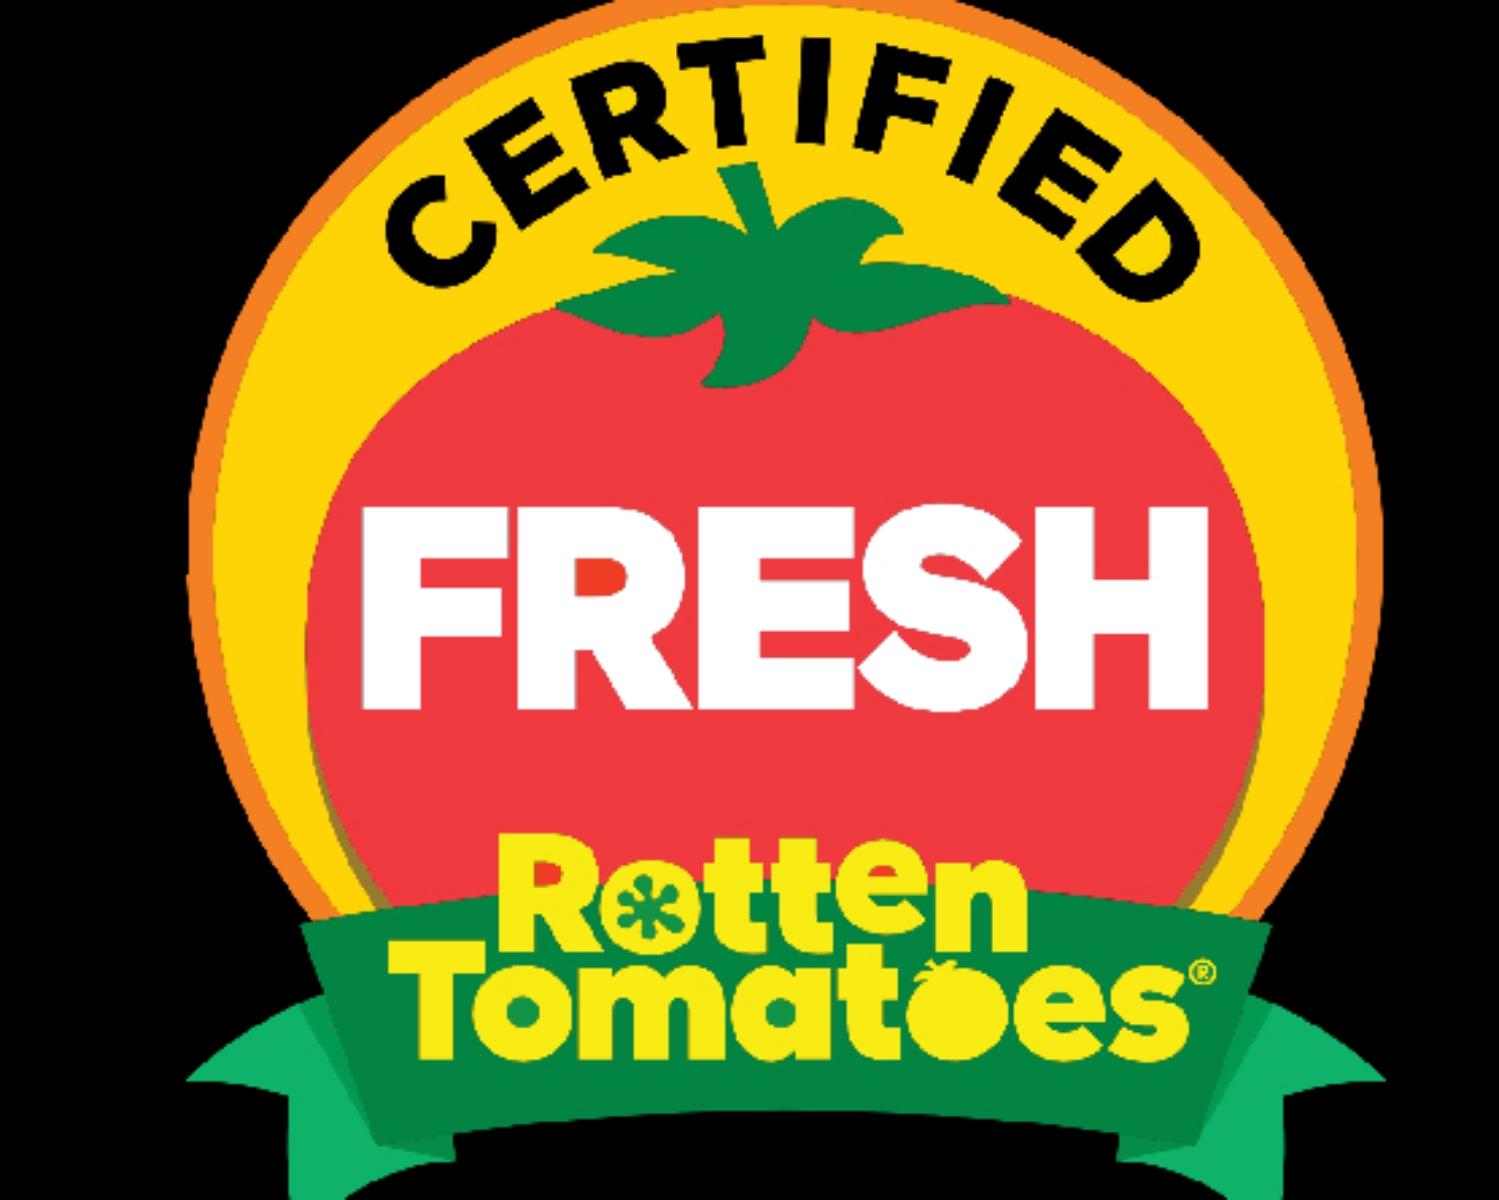 The Certified Fresh